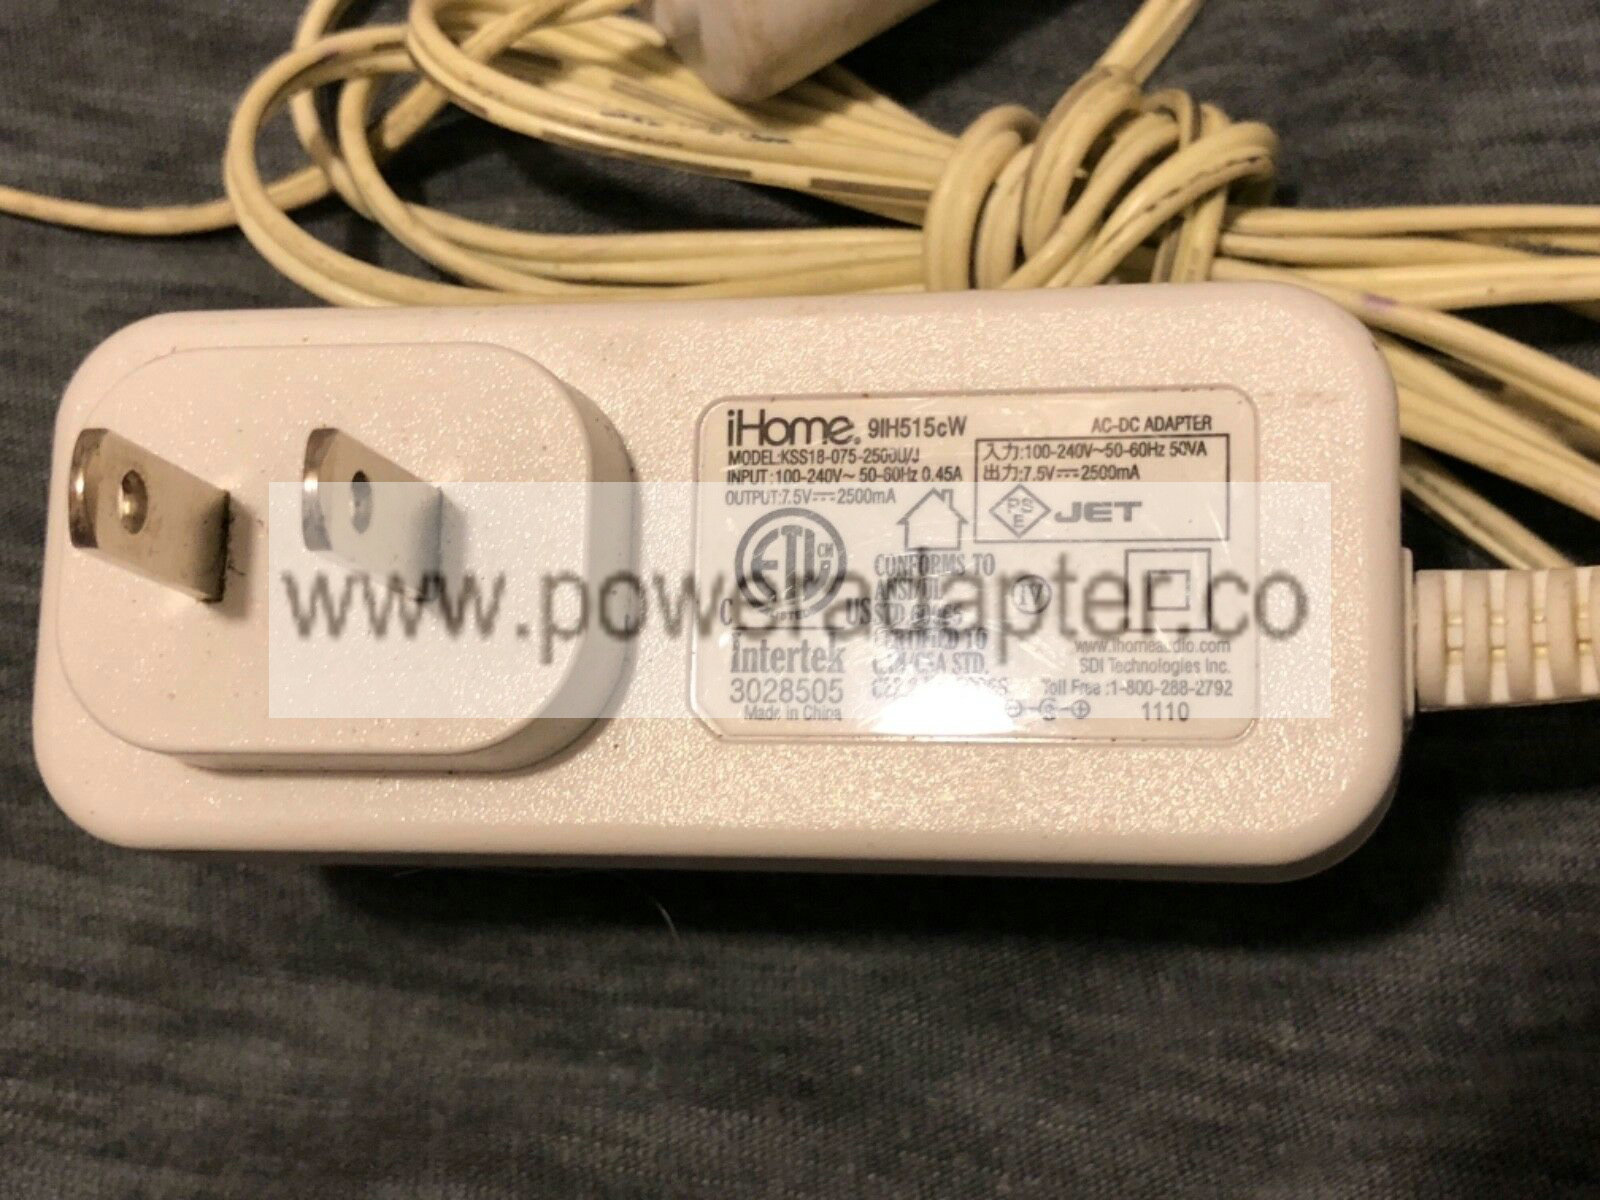 Ihome AC Power Supply Adapter Charger 7.5v 2500ma Type: AC/AC Adapter Brand: Ihome Output Voltage: 7.5 V MPN: Does